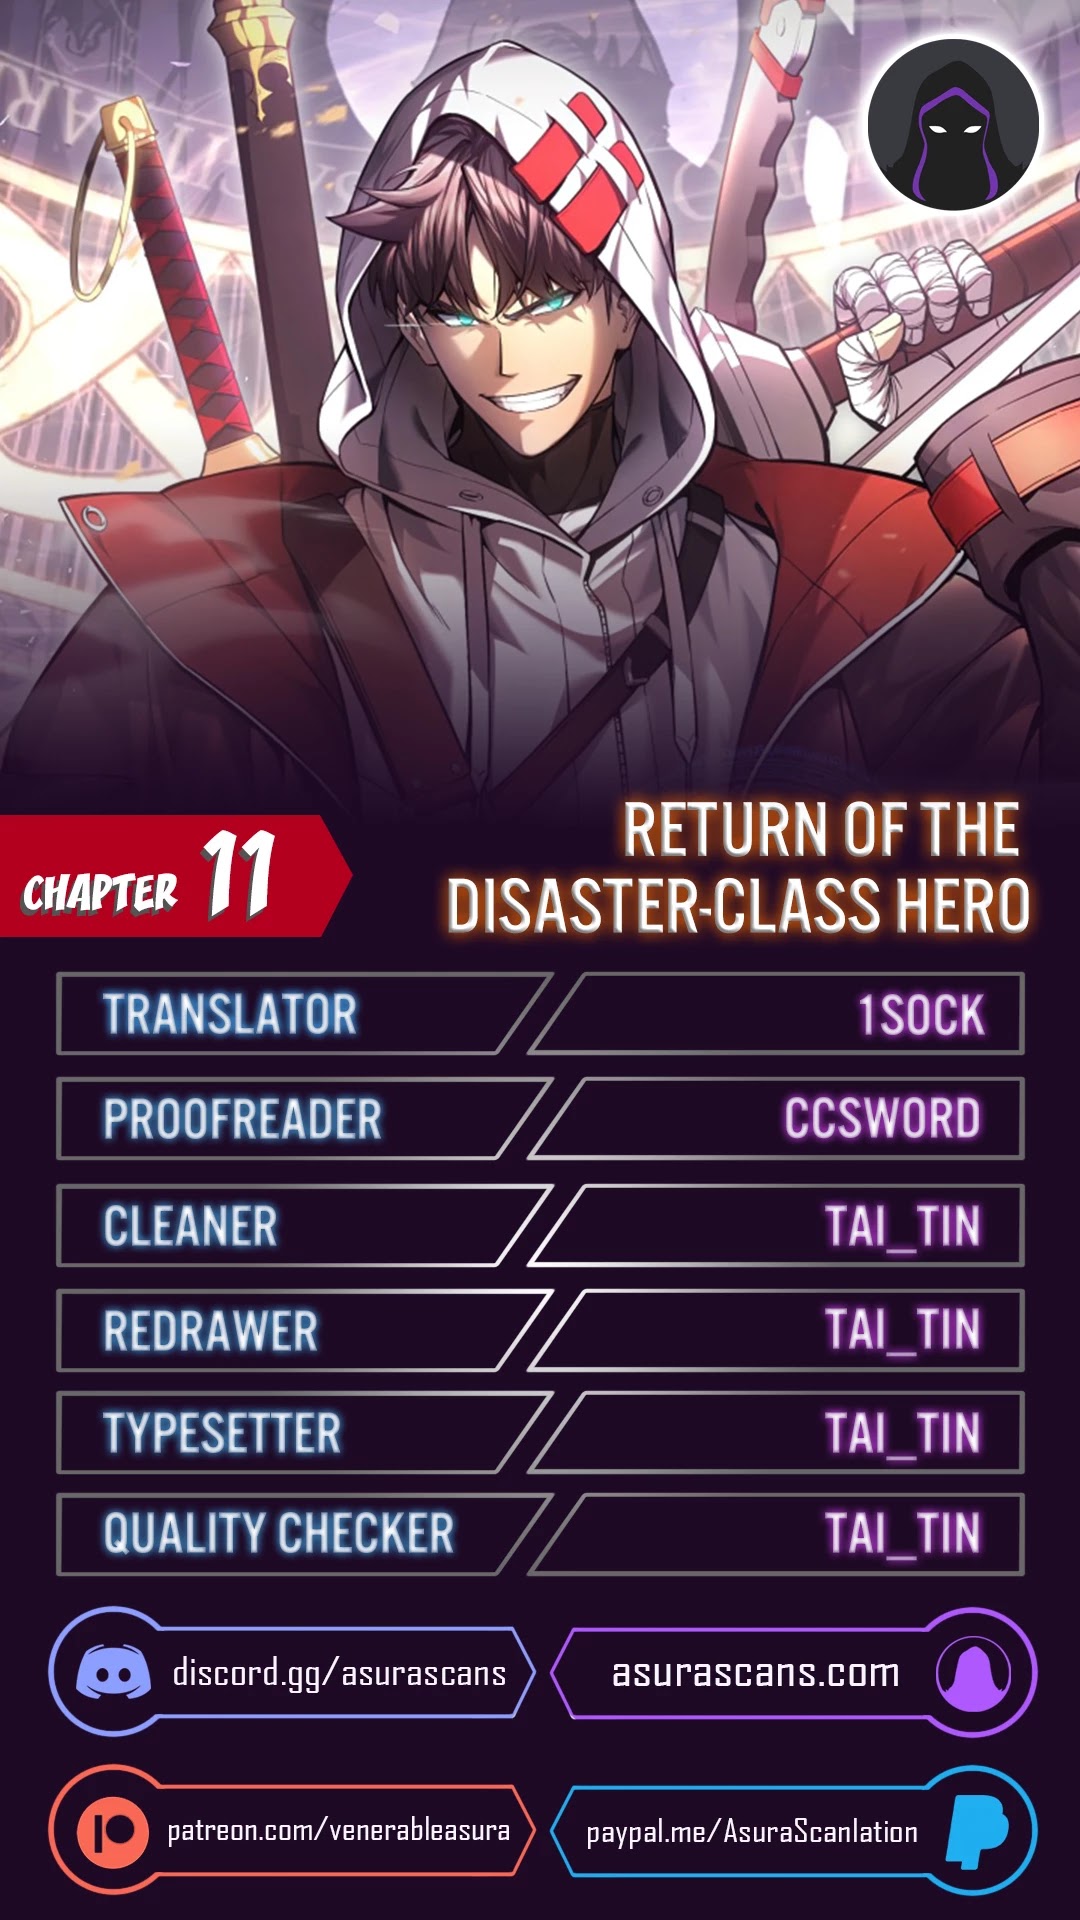 The Return Of The Disaster-Class Hero Chapter 11